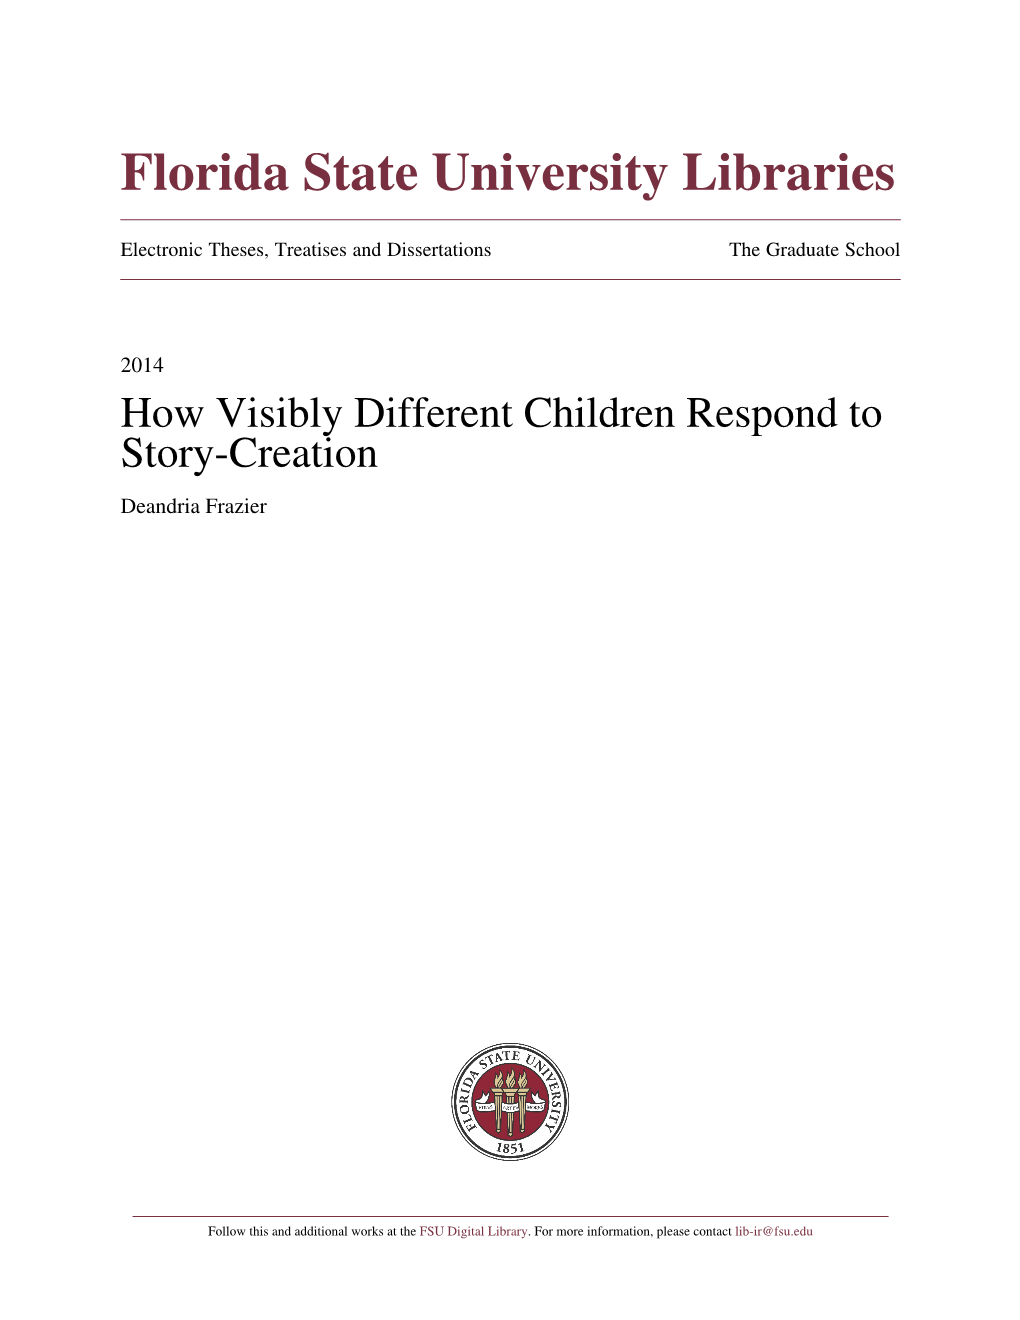 How Visibly Different Children Respond to Story-Creation Deandria Frazier